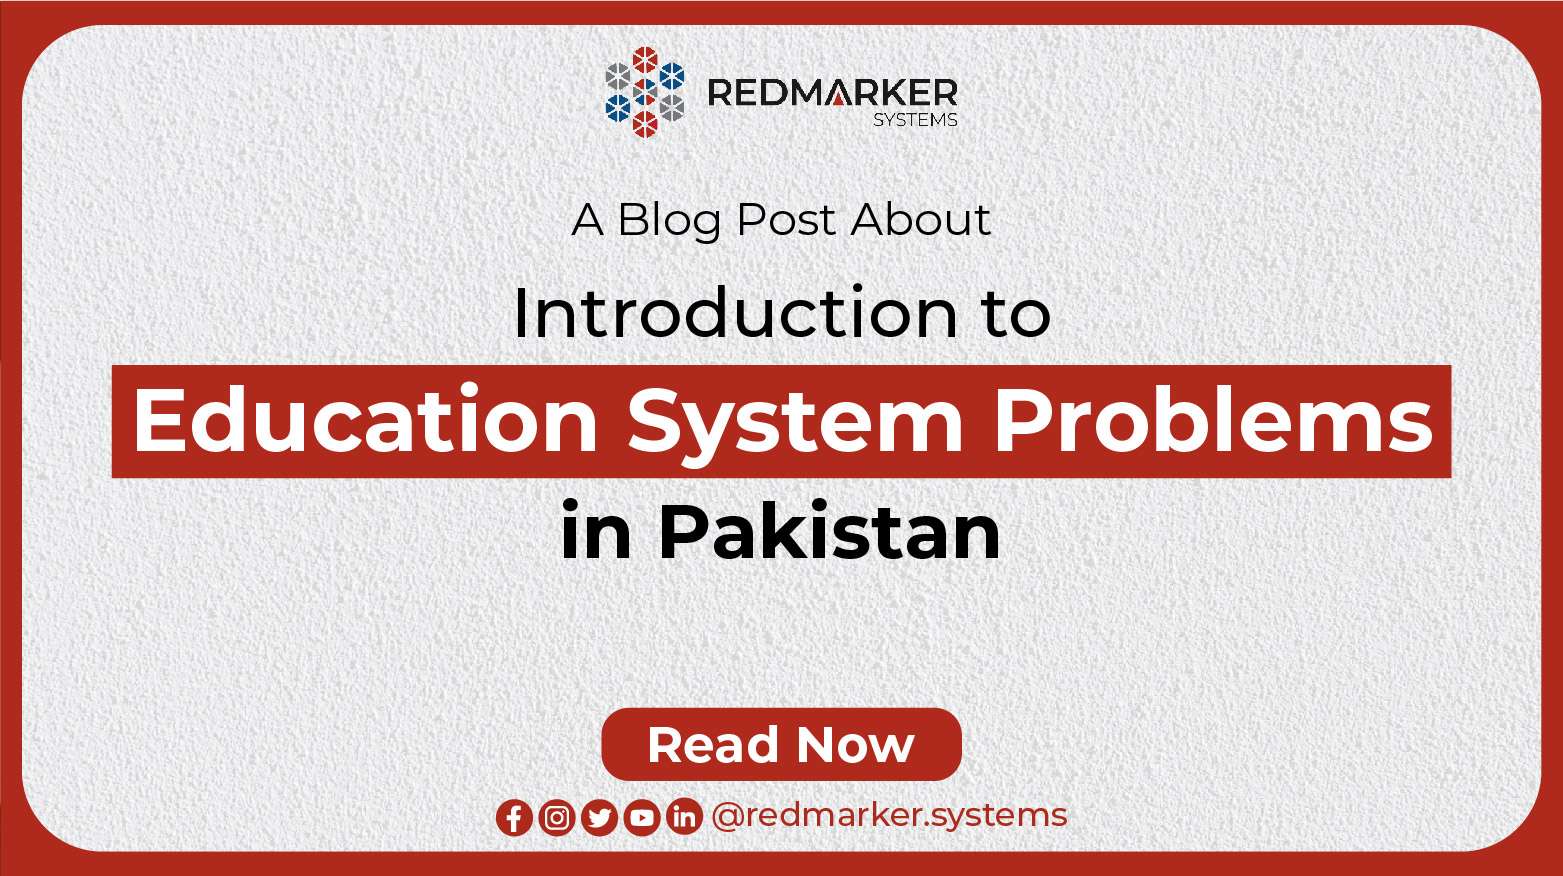 Education System Problems in Pakistan